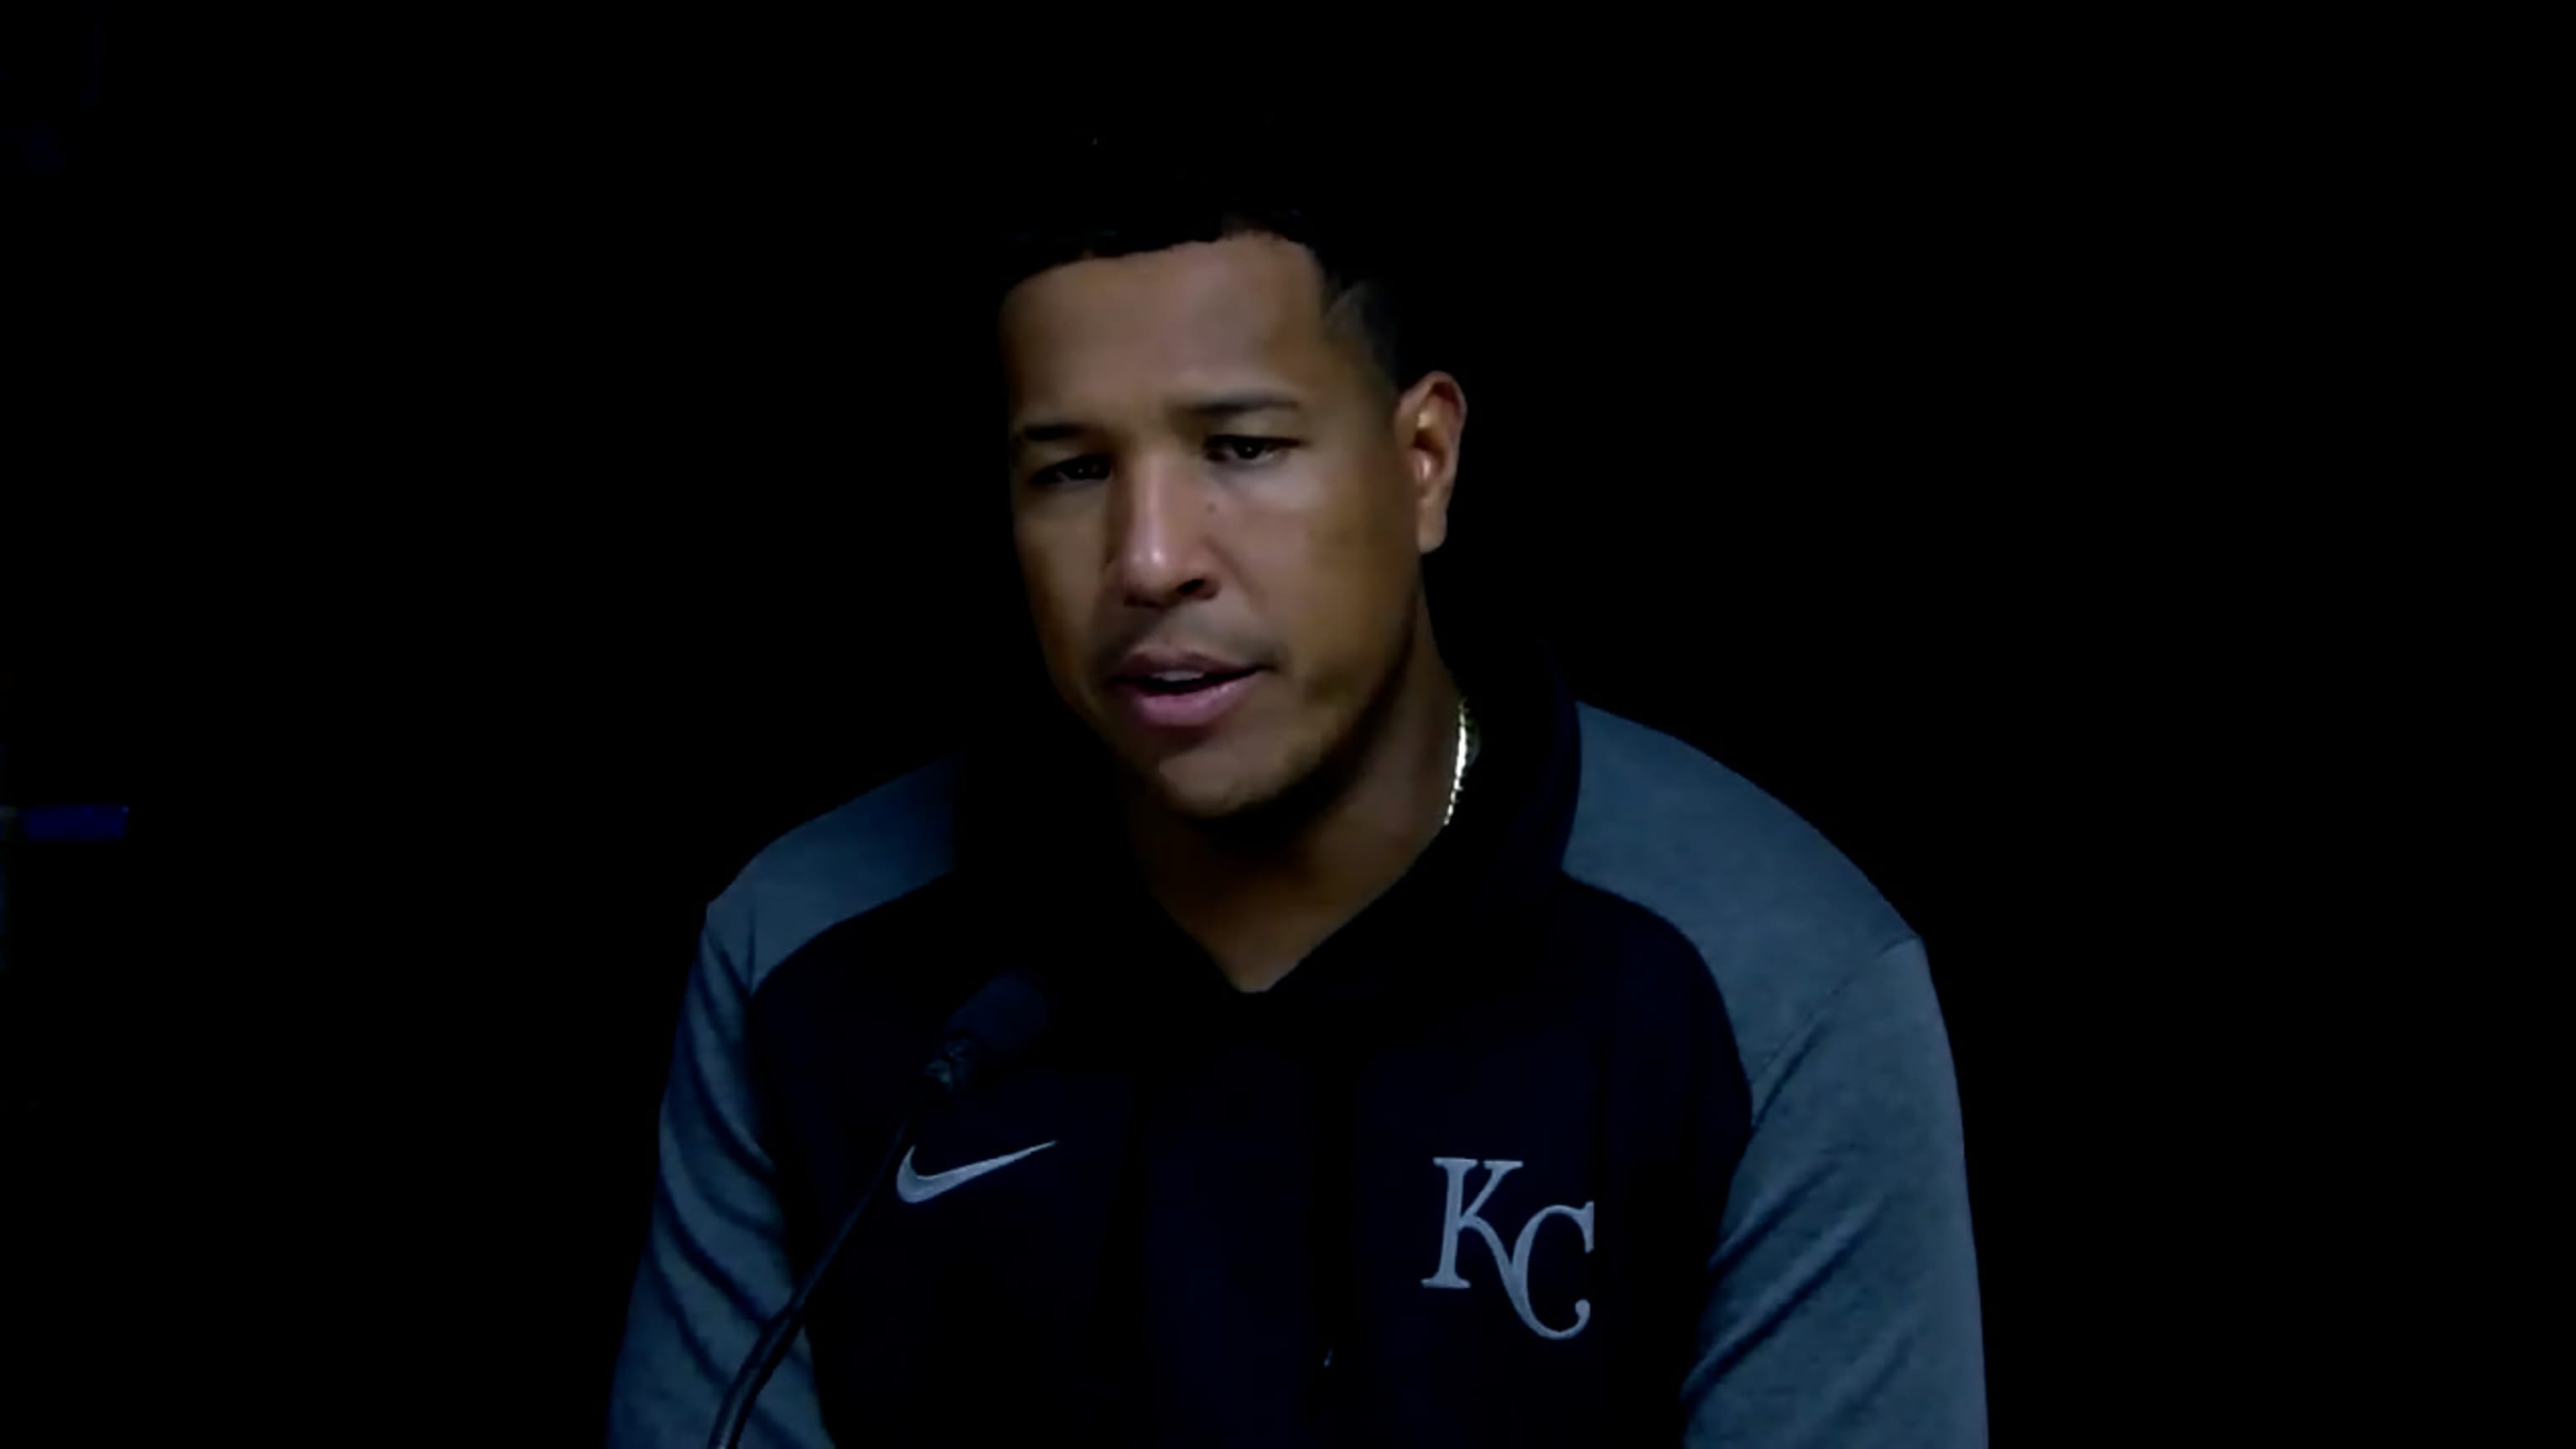 Salvador Perez Is the HR King at Catcher; How Does He Stack Up